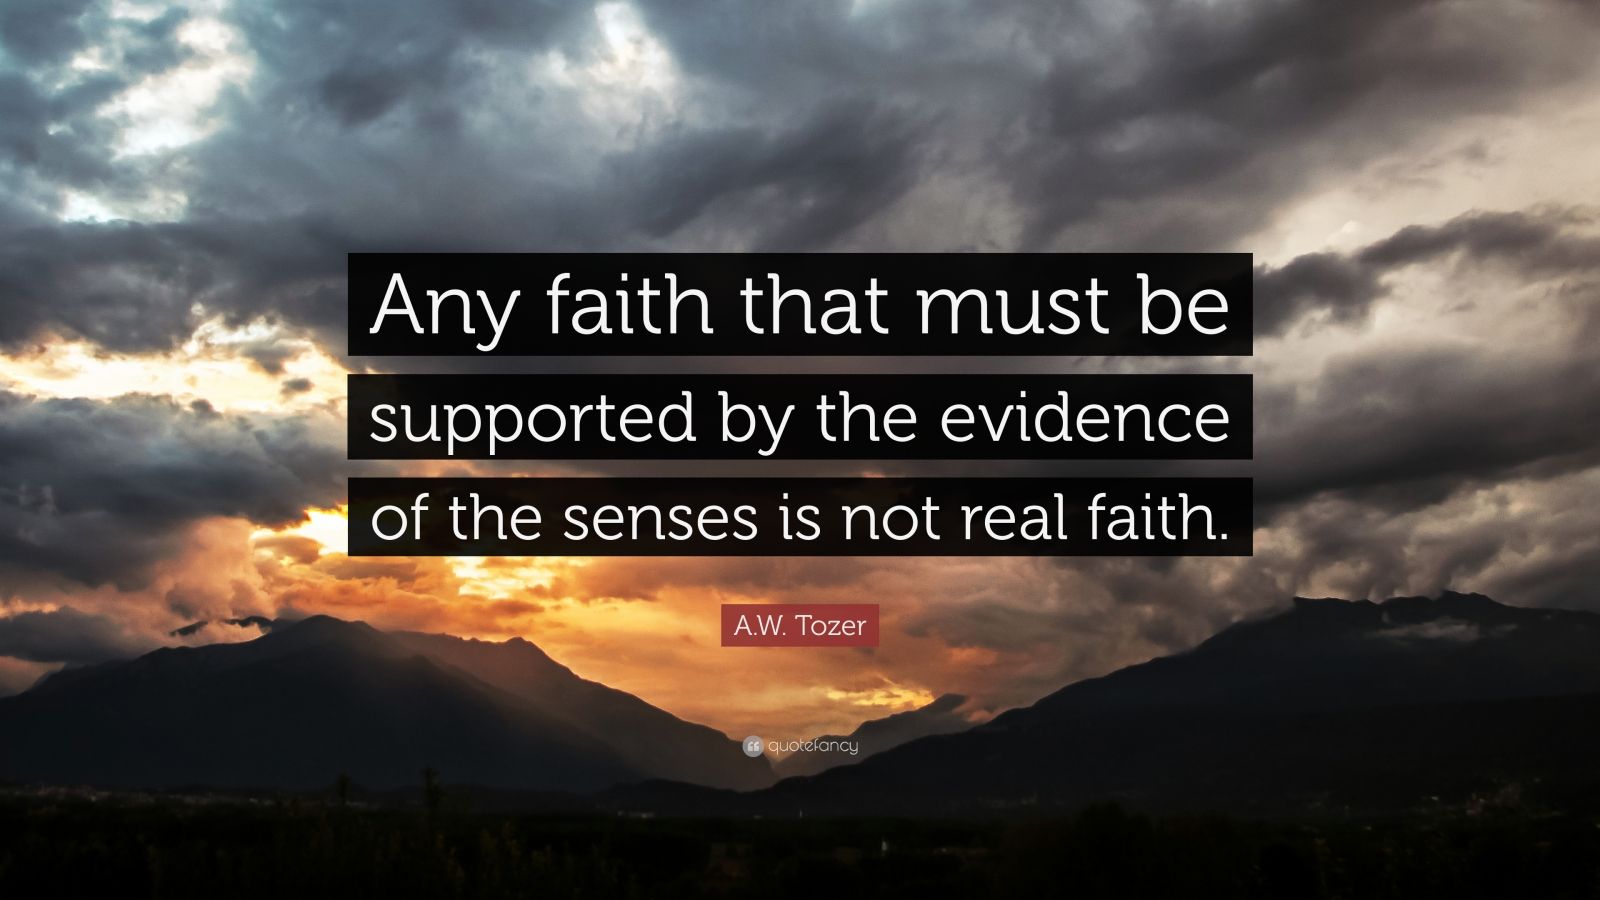 A.W. Tozer Quote: “Any faith that must be supported by the evidence of ...